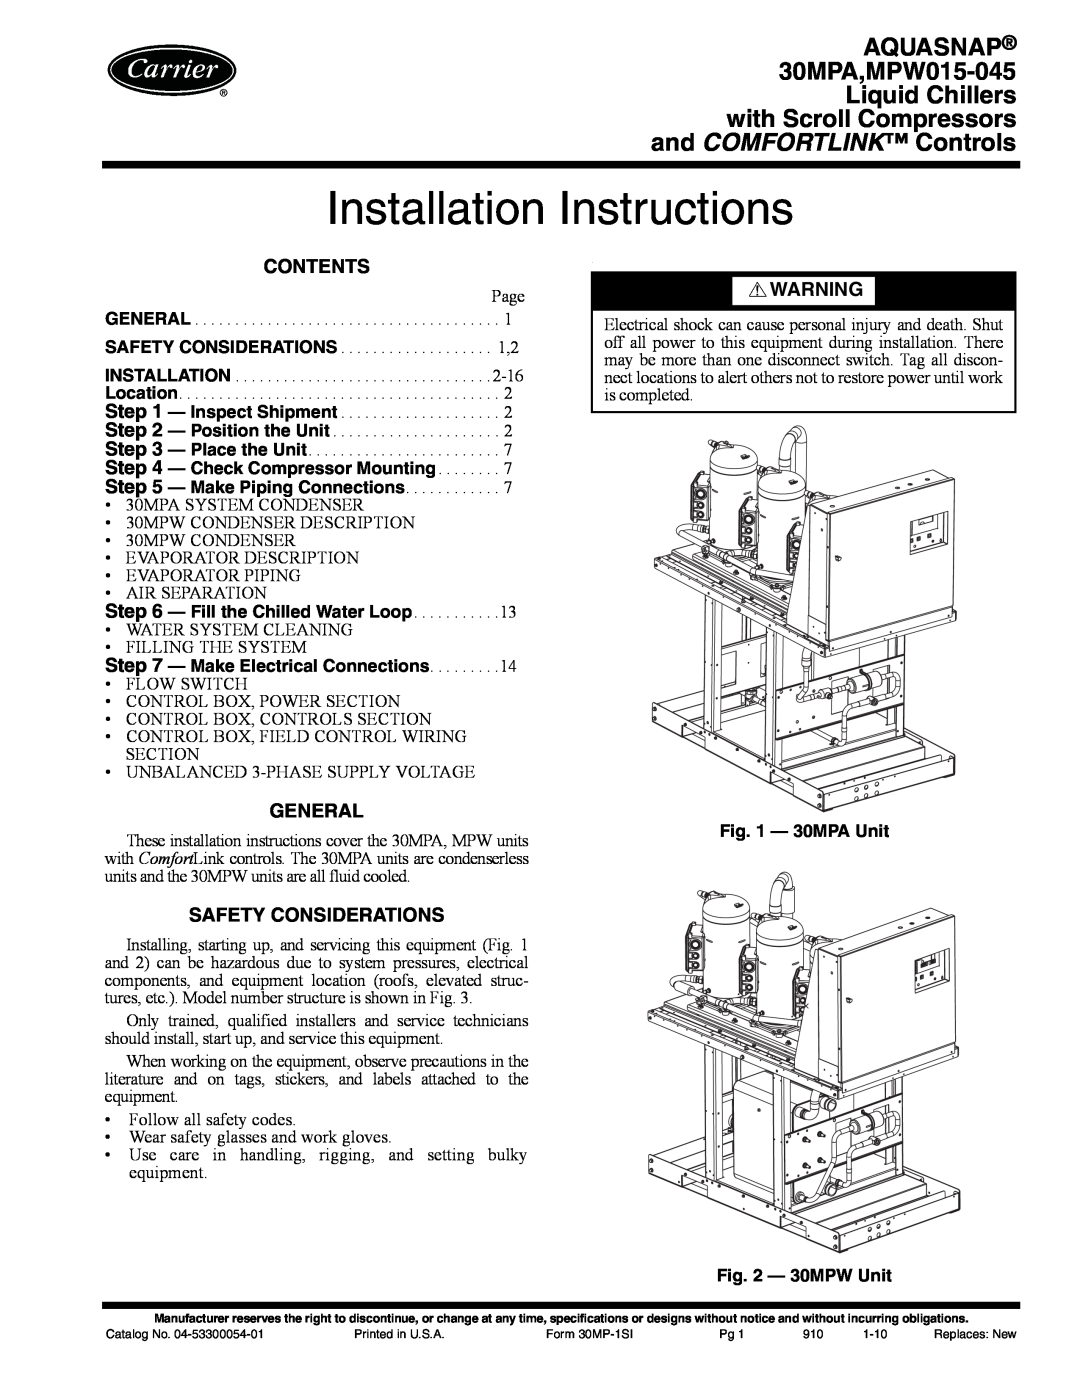 Carrier 30MPA installation instructions Contents, General, Safety Considerations, a30-5029, a30-5030 